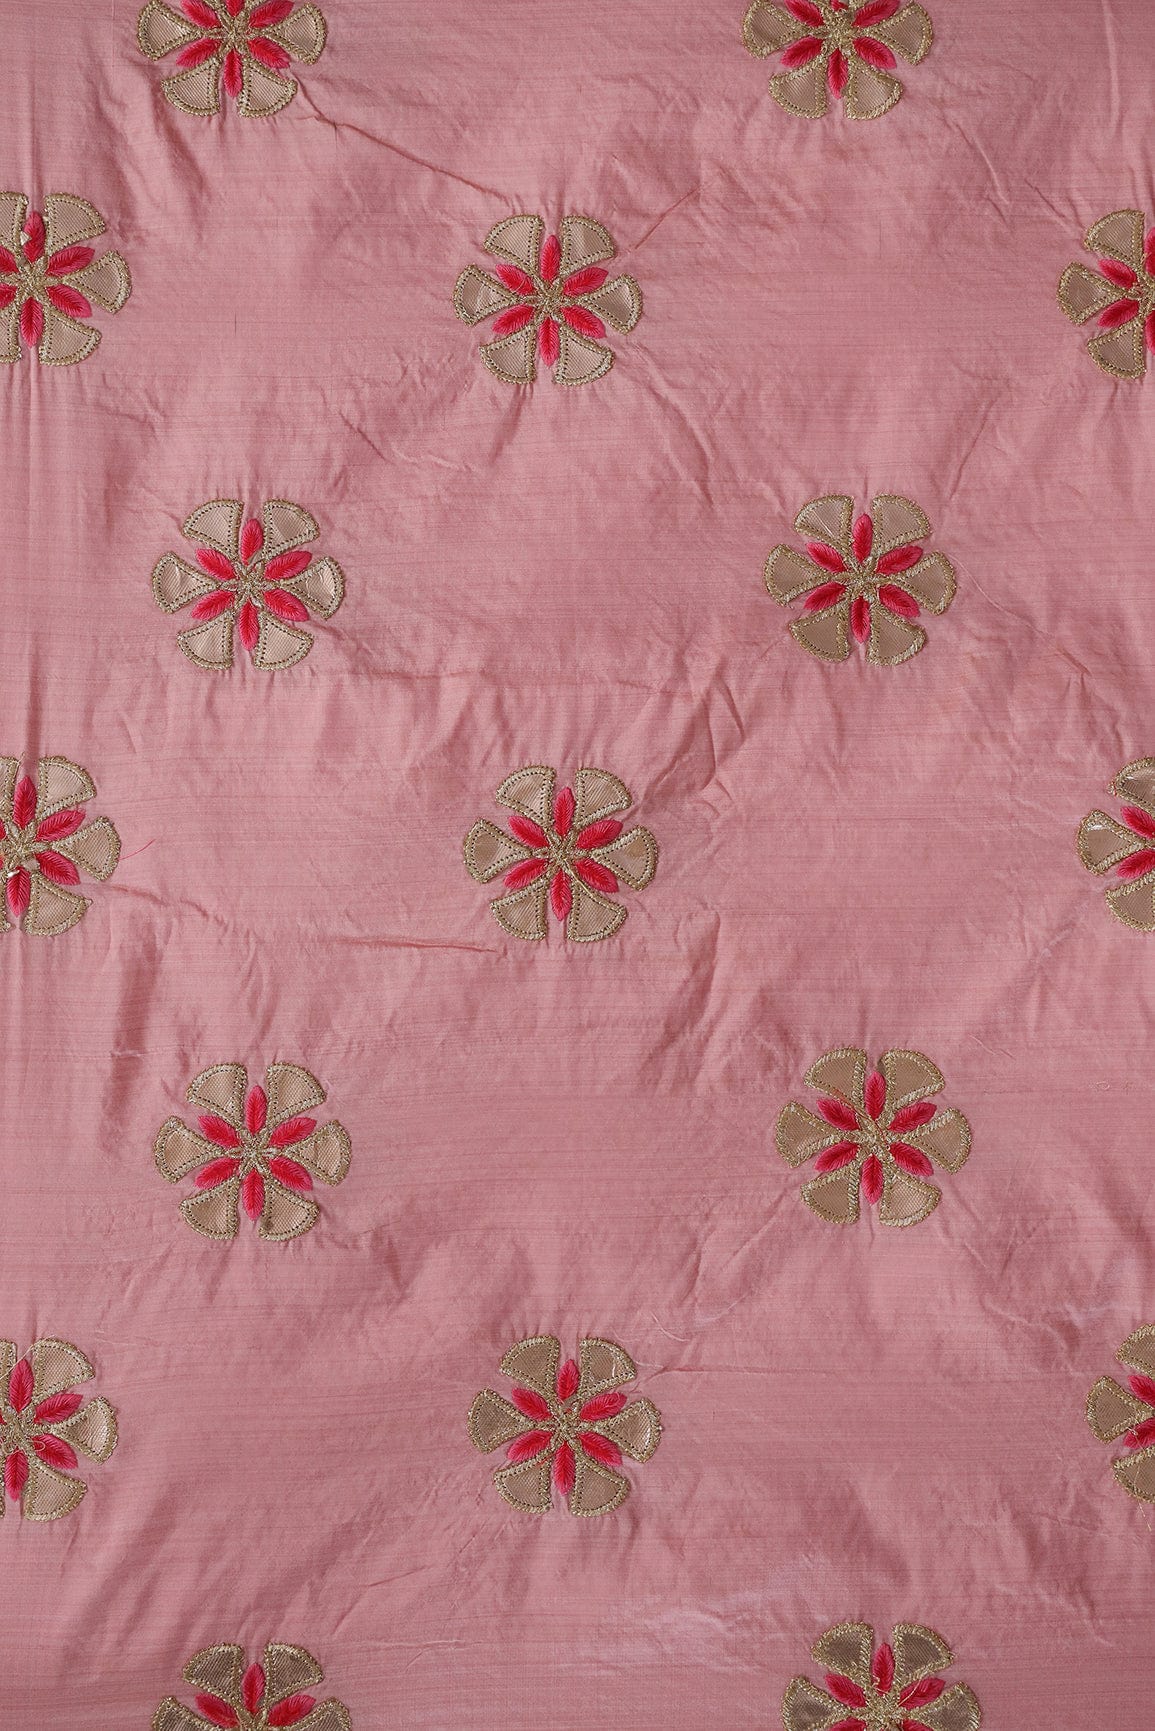 doeraa Embroidery Fabrics Zari With Red and Pink Motif Embroidery On Baby Pink Bamboo Silk Fabric